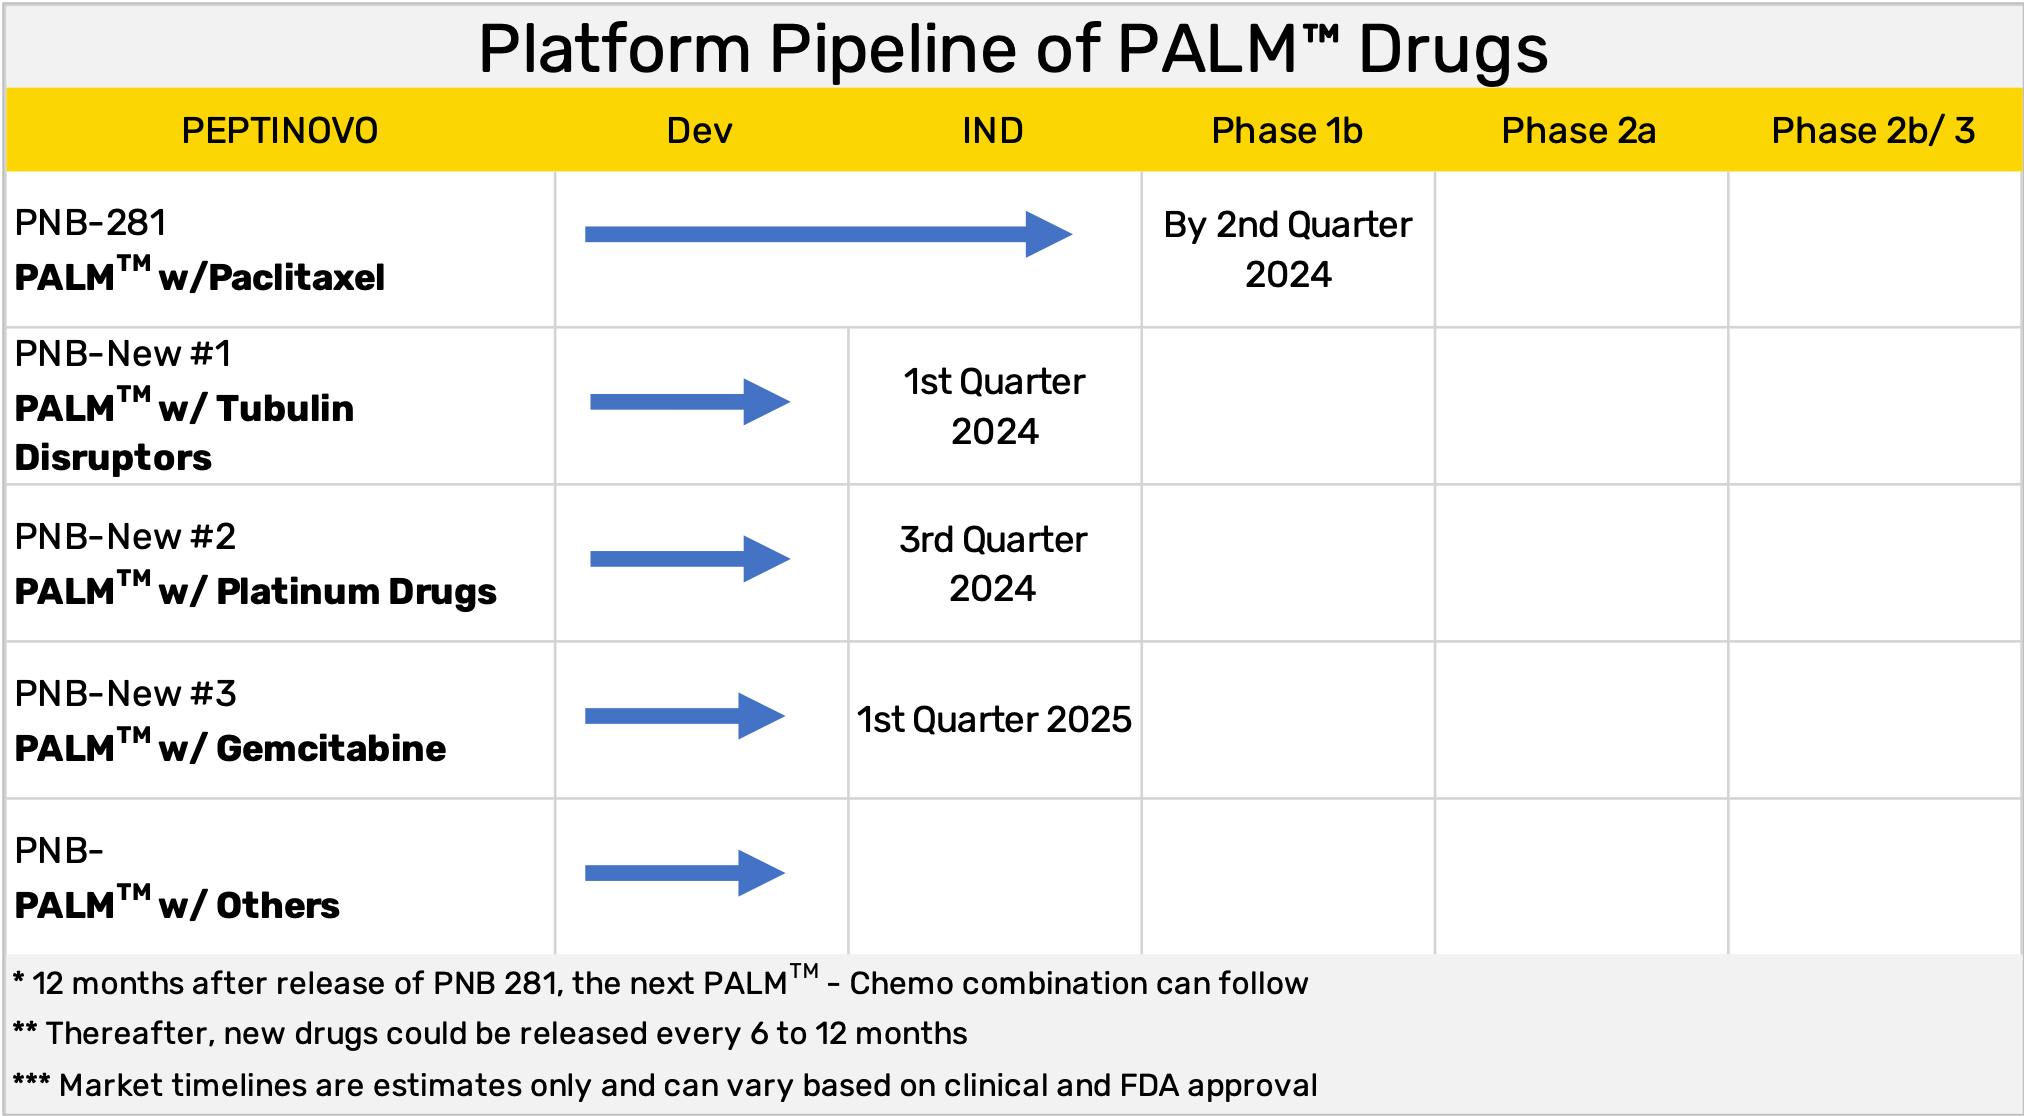 Platform Pipeline showing many future drugs prospects